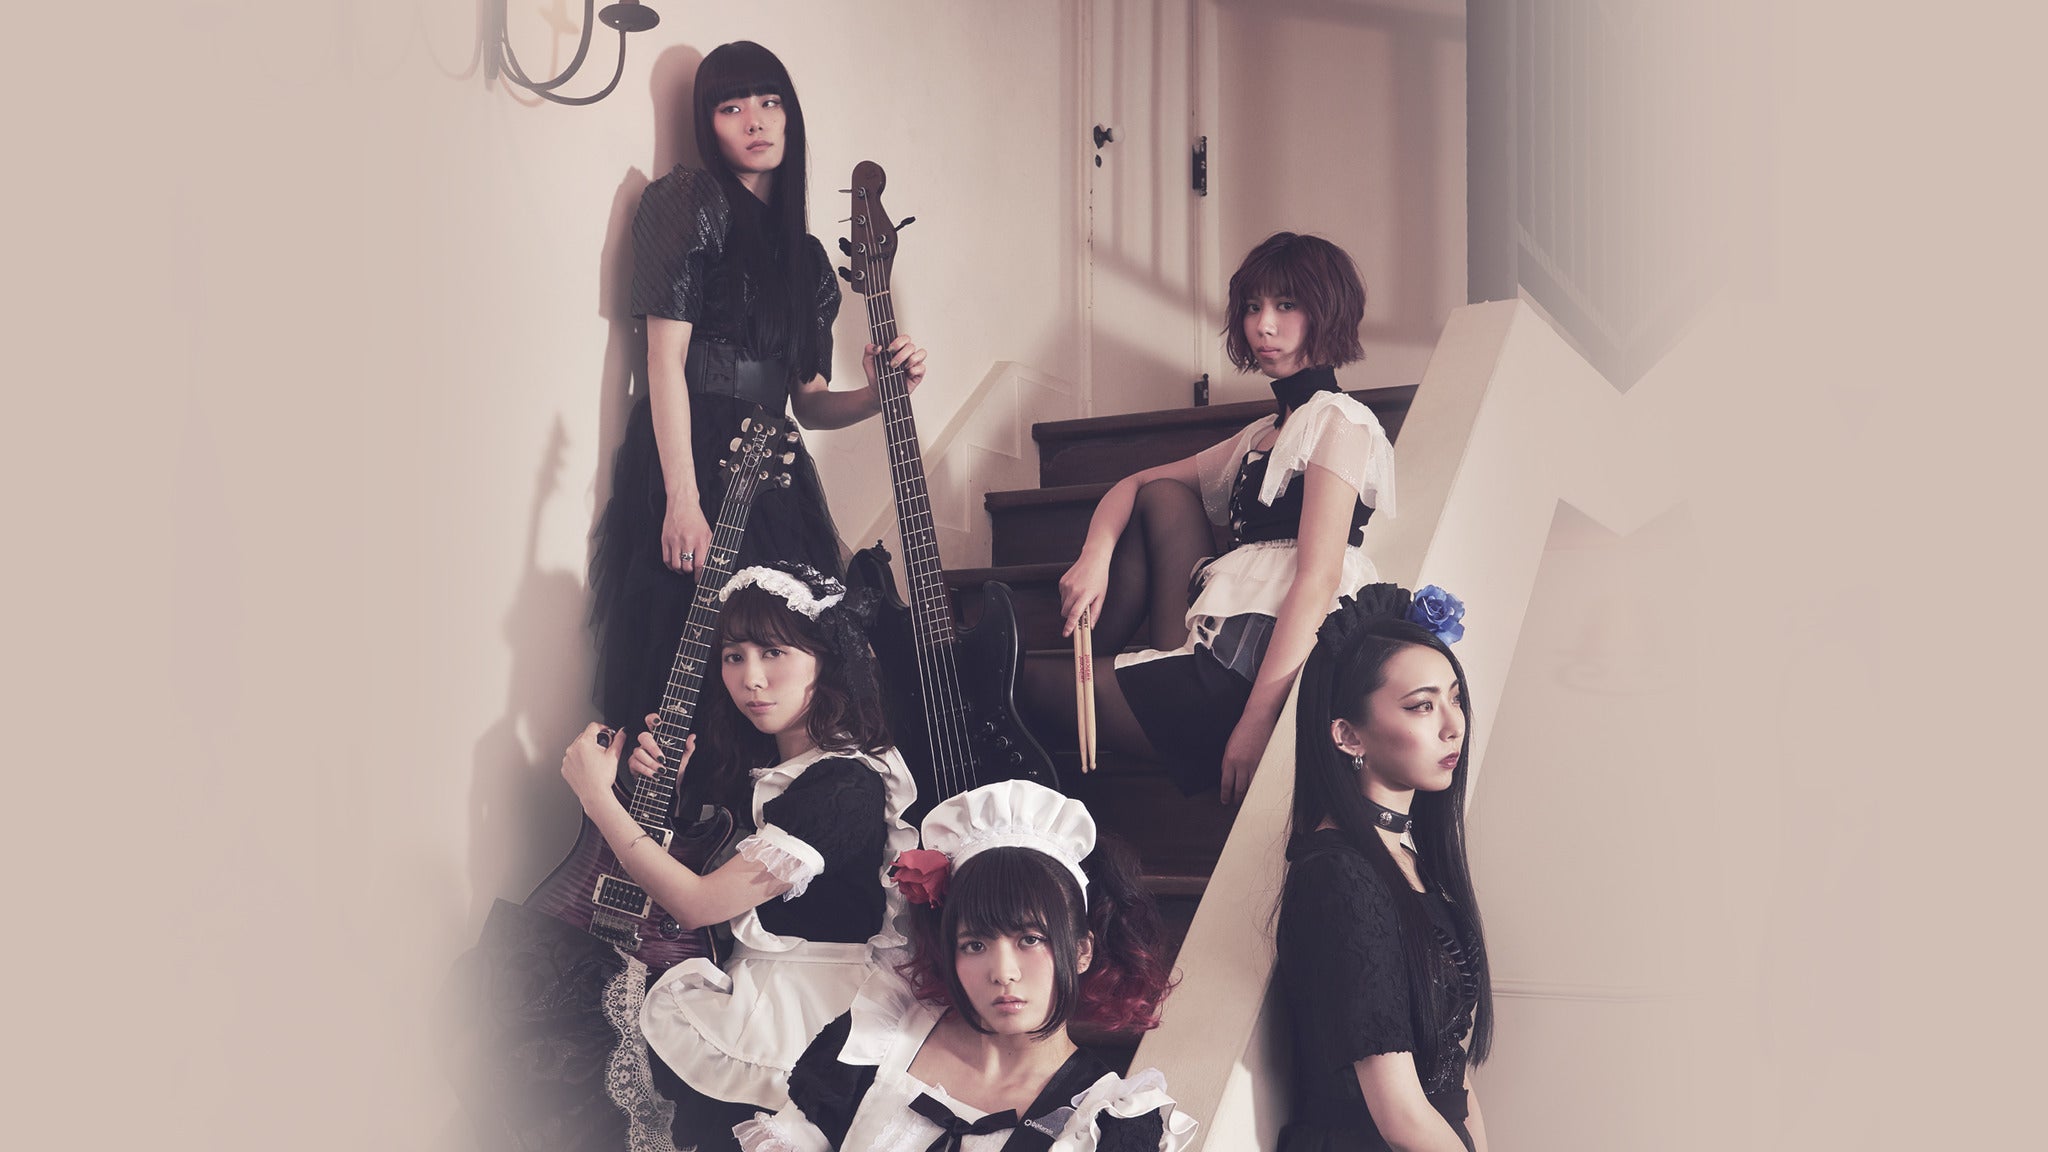 BAND-MAID WORLD DOMINATION TOUR 2019 ~gekidou~ in New York promo photo for Official Platinum presale offer code